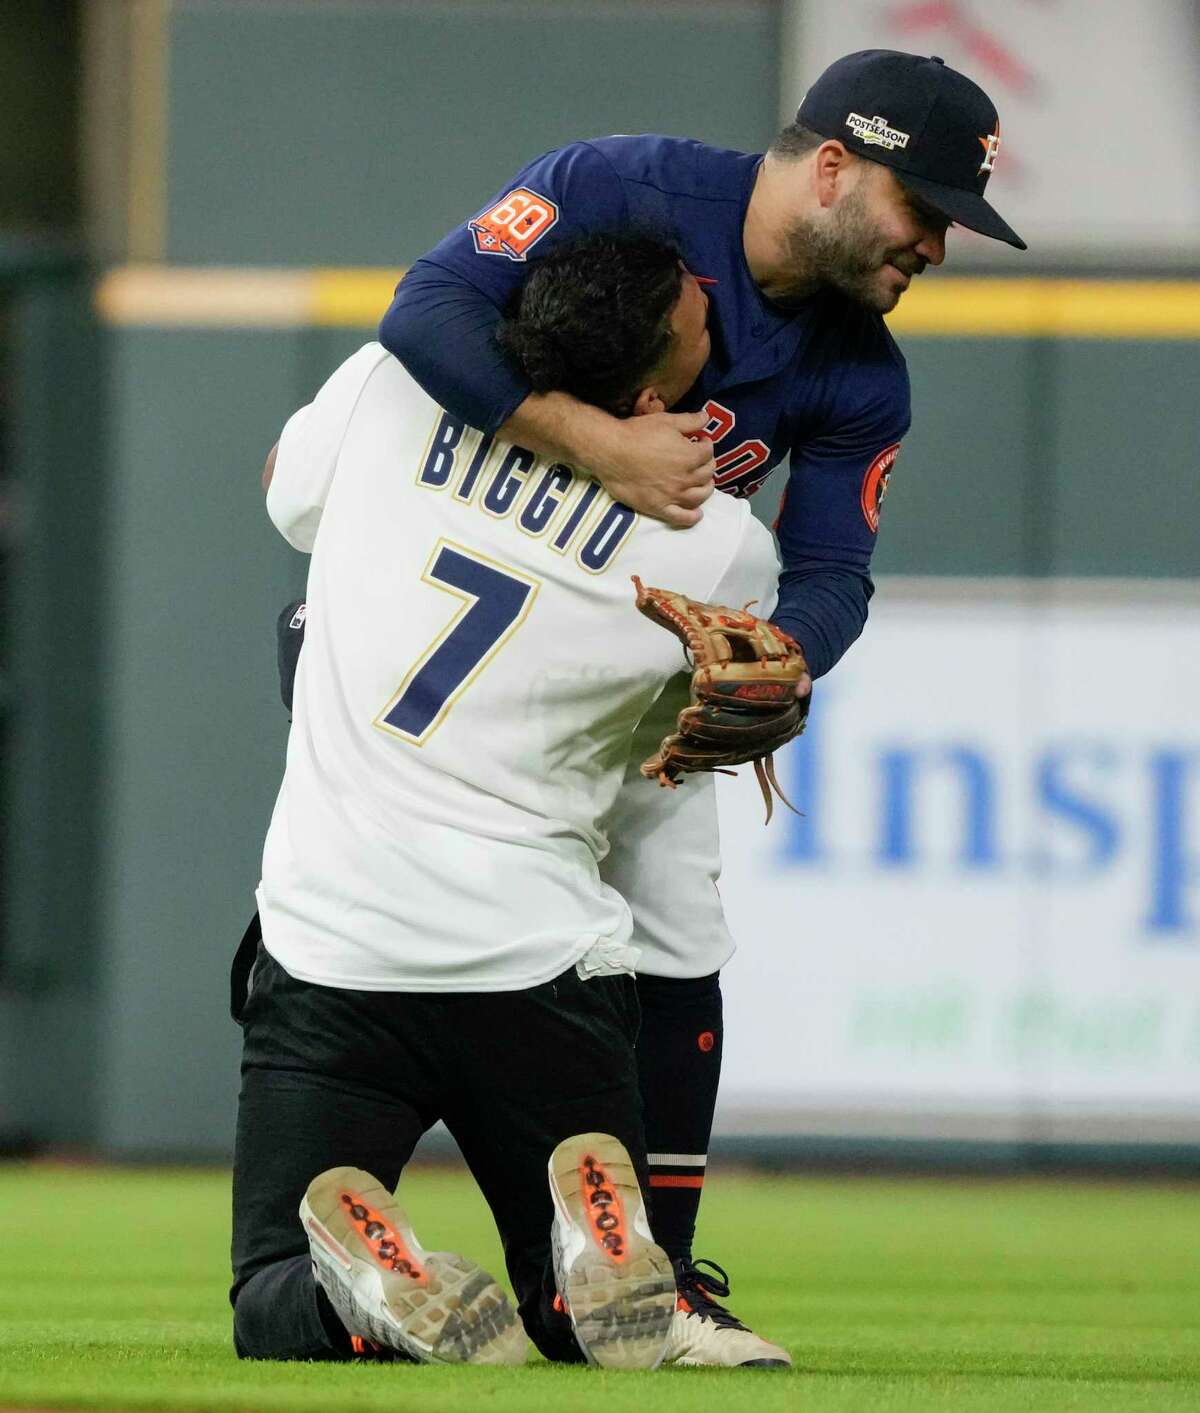 Young Astros Fan Had Heartwarming Reaction After Receiving Jose Altuve's  Jersey - Sports Illustrated